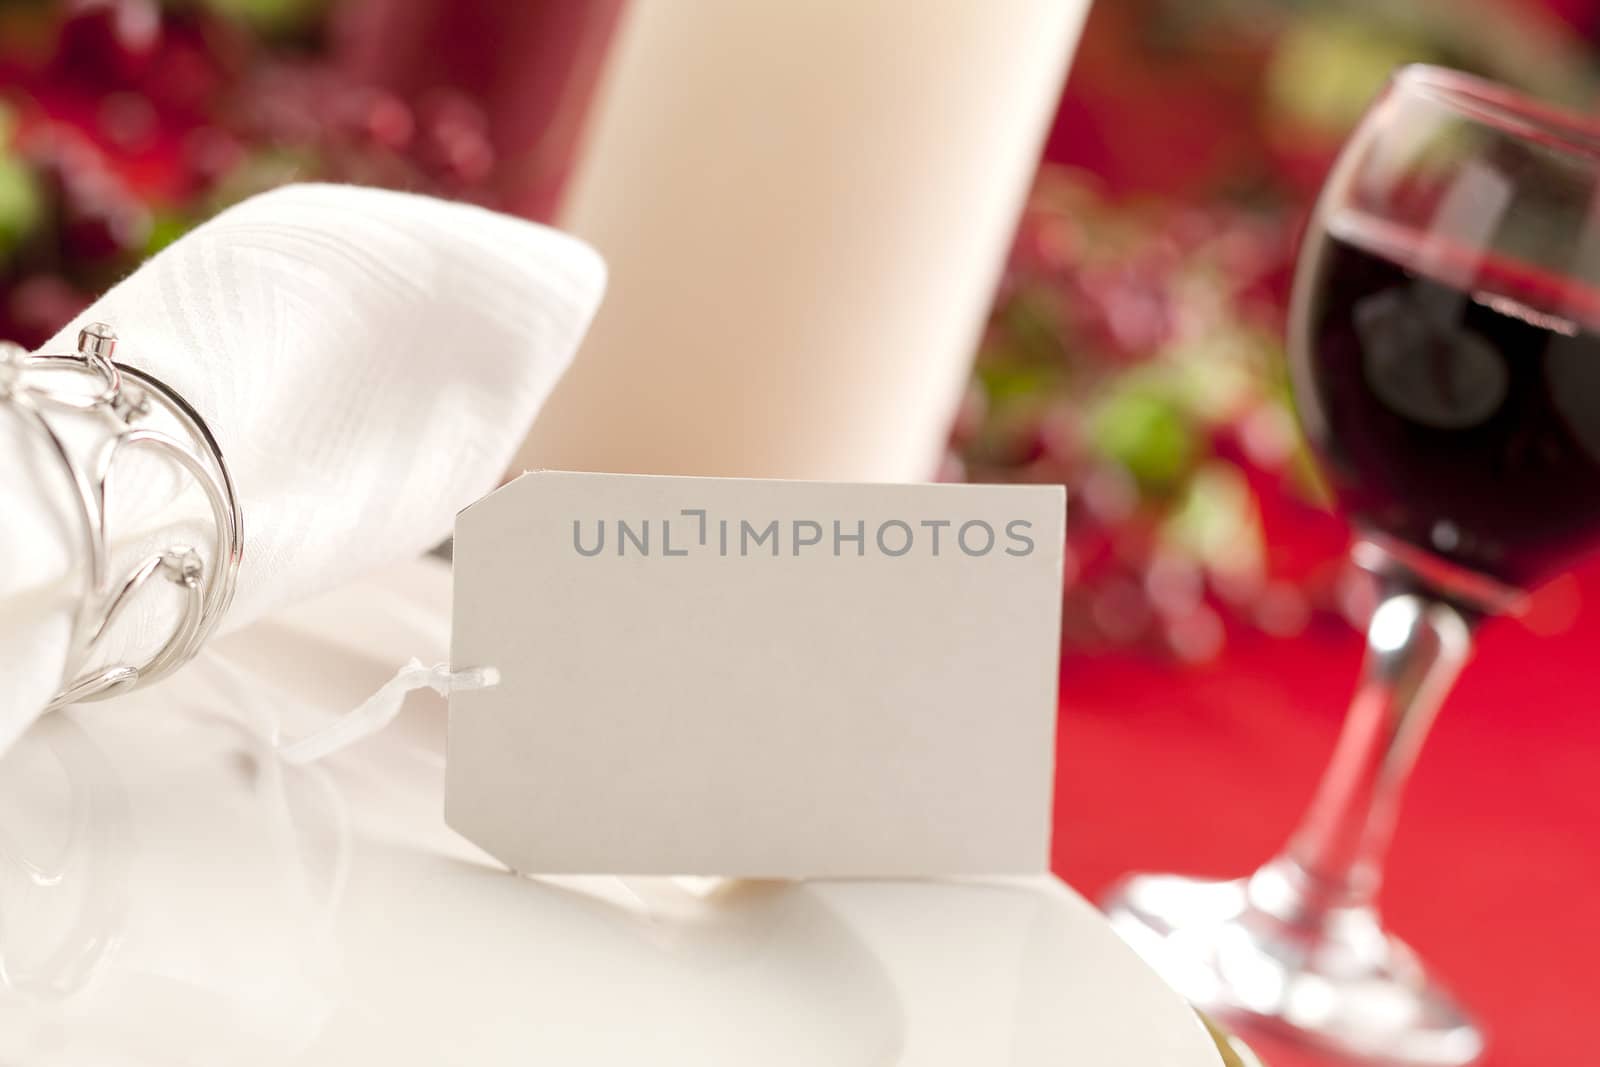 Image of a white plate with table napkin and a blurred wine glass on the side on holiday season